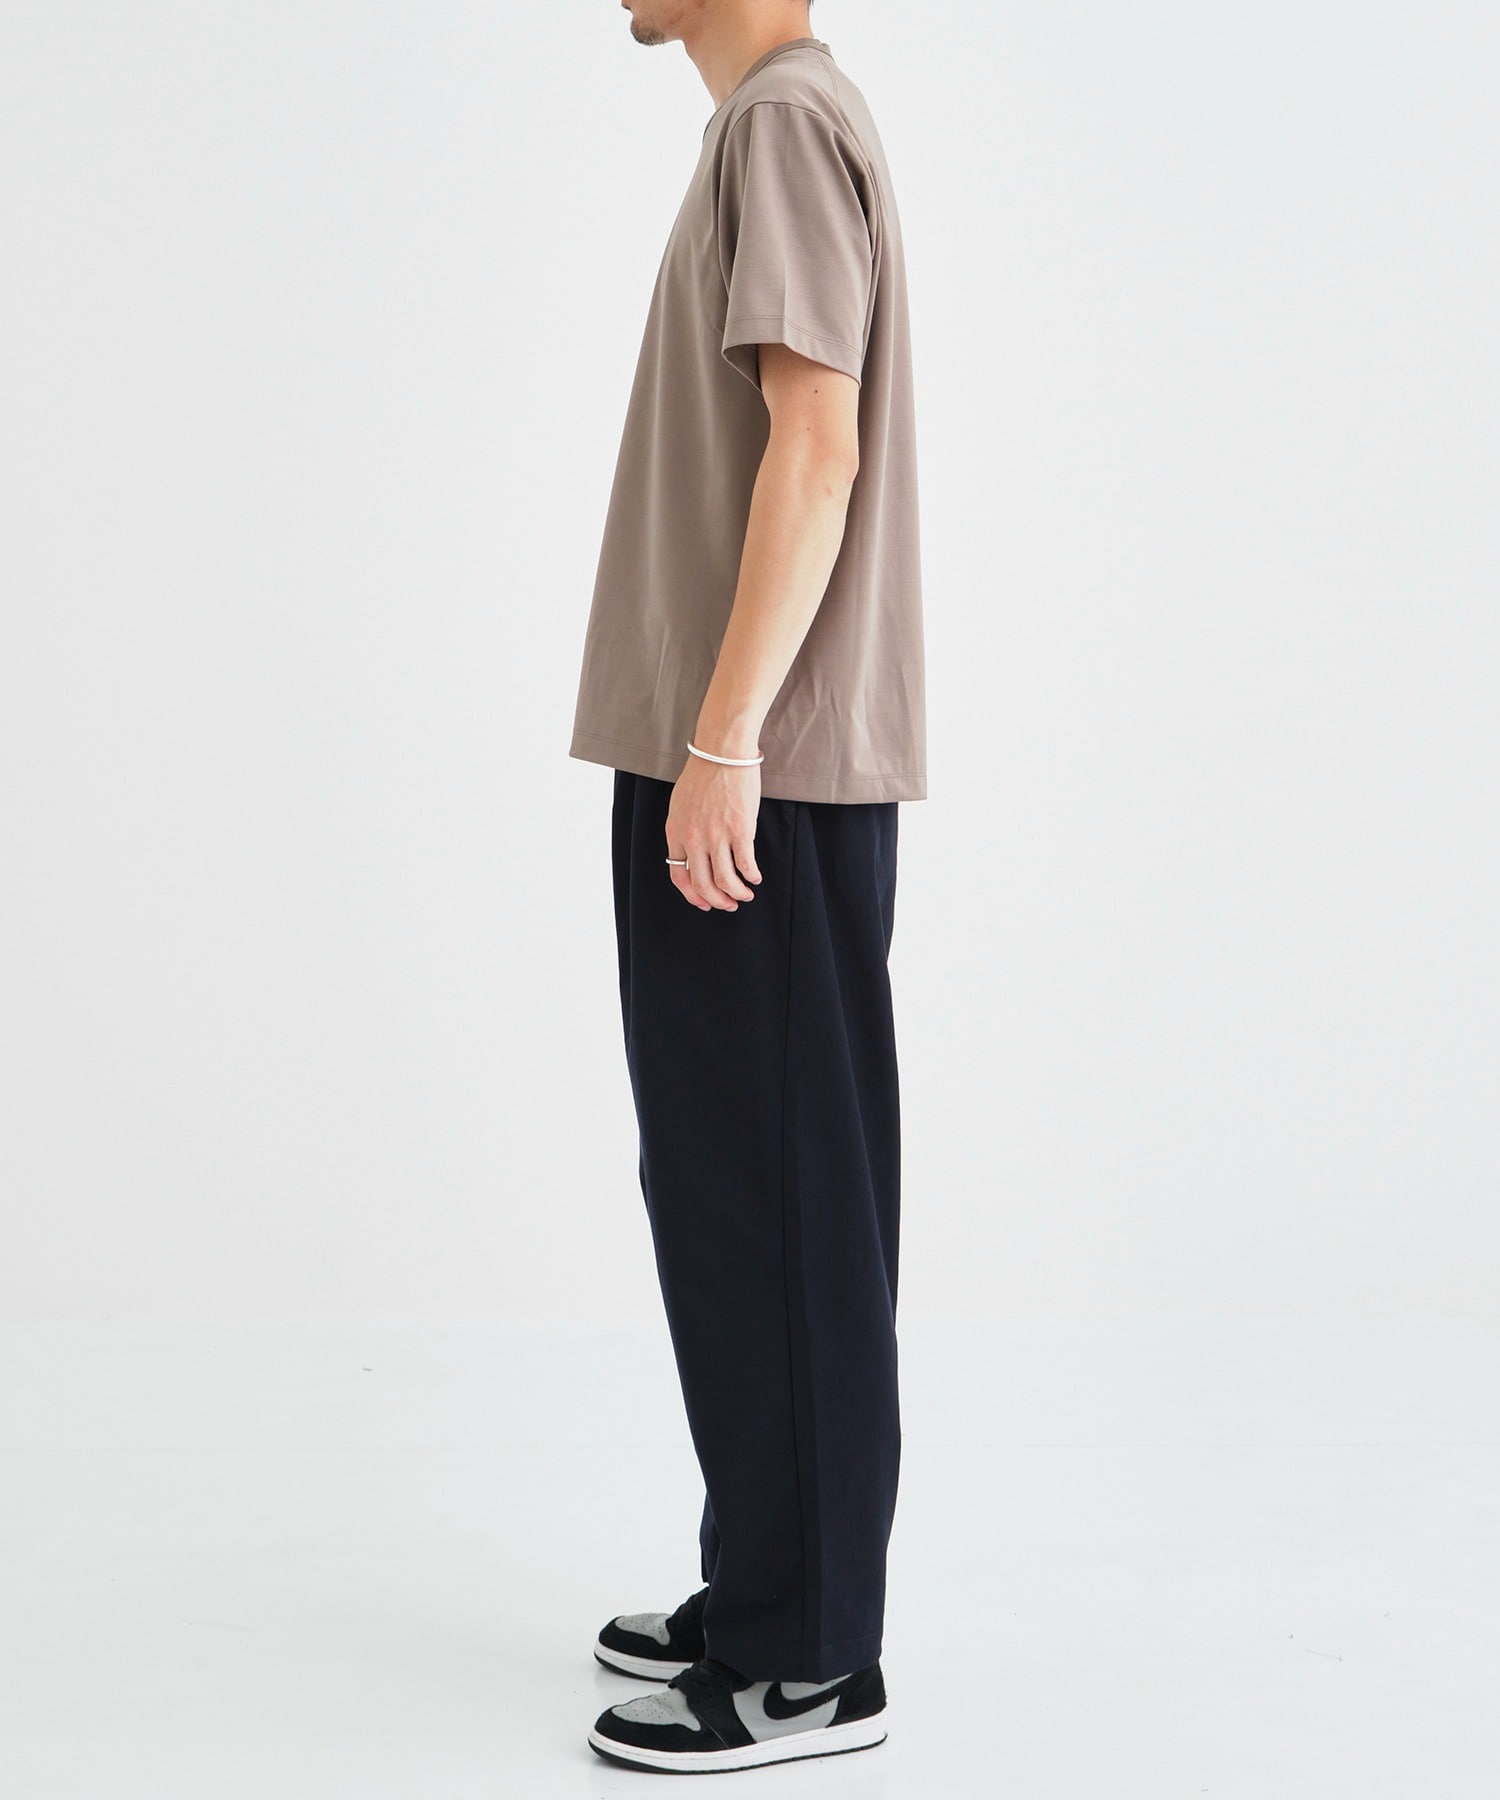 ×Gramicci STRETCH 3 TUCK PANTS White Mountaineering